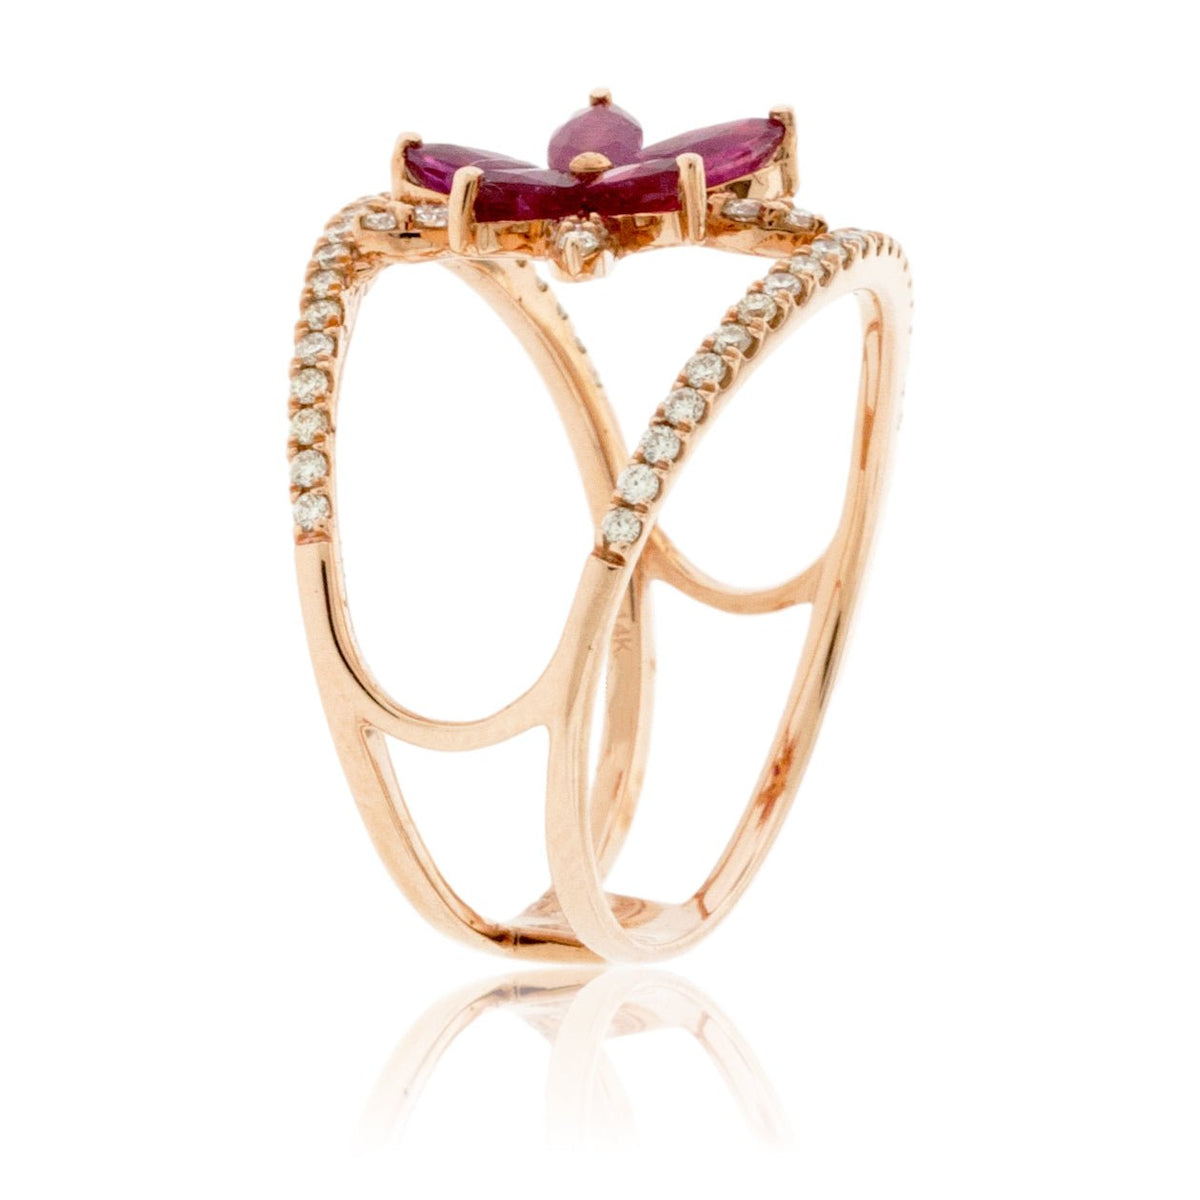 Rose Gold Ruby Flower and Diamond Ring - Park City Jewelers